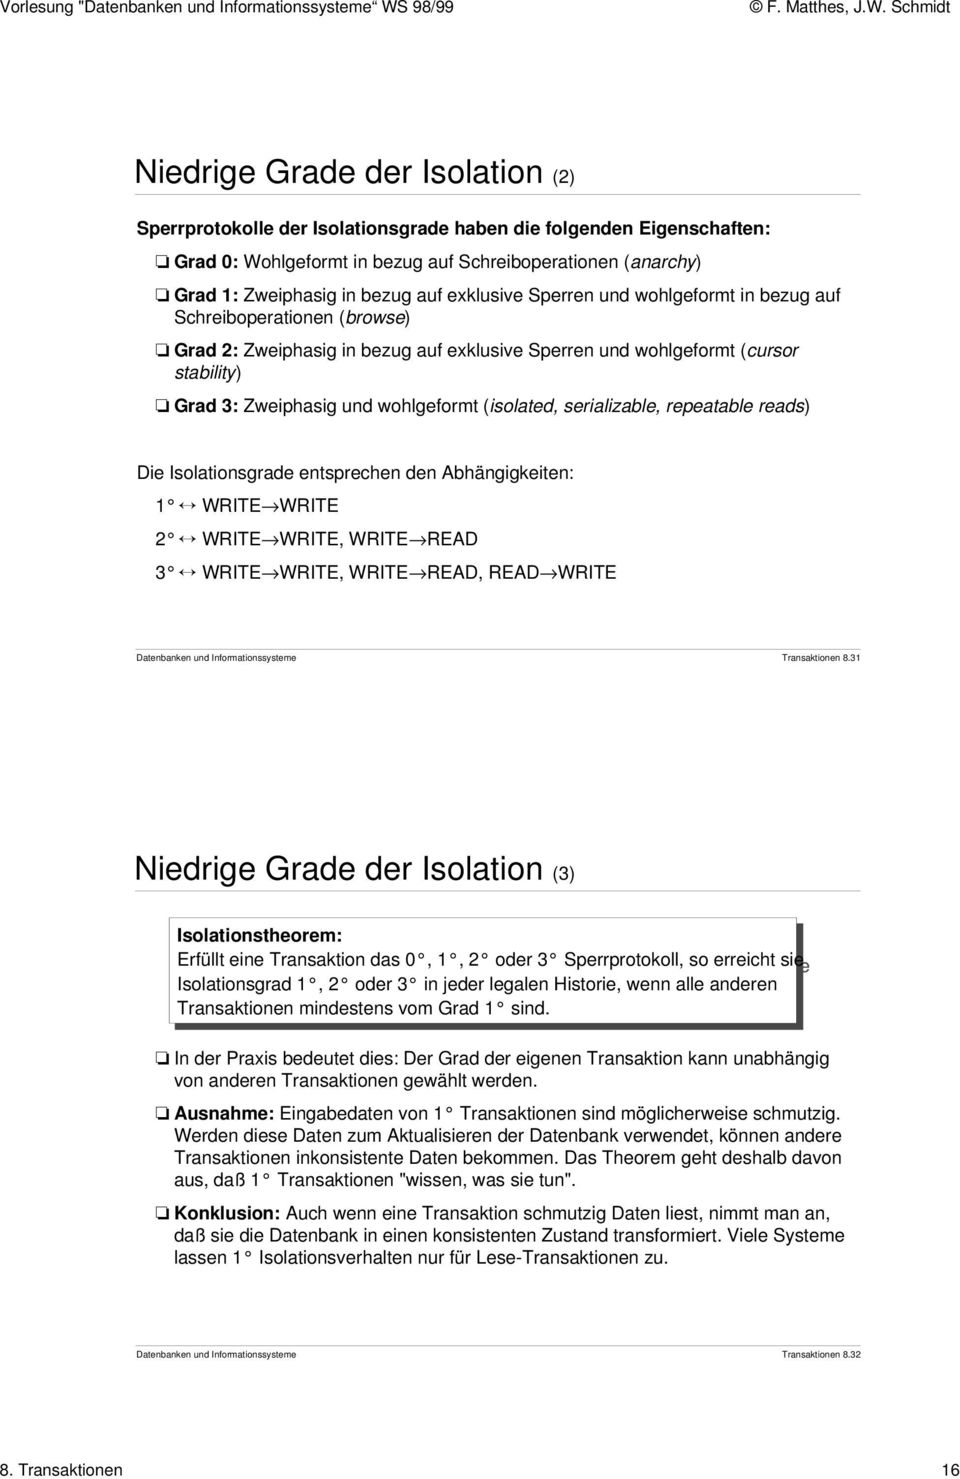 Zweiphasig und wohlgeformt (isolated, serializable, repeatable reads) Die Isolationsgrade entsprechen den bhängigkeiten: 1 WRITE WRITE 2 WRITE WRITE, WRITE RED 3 WRITE WRITE, WRITE RED, RED WRITE